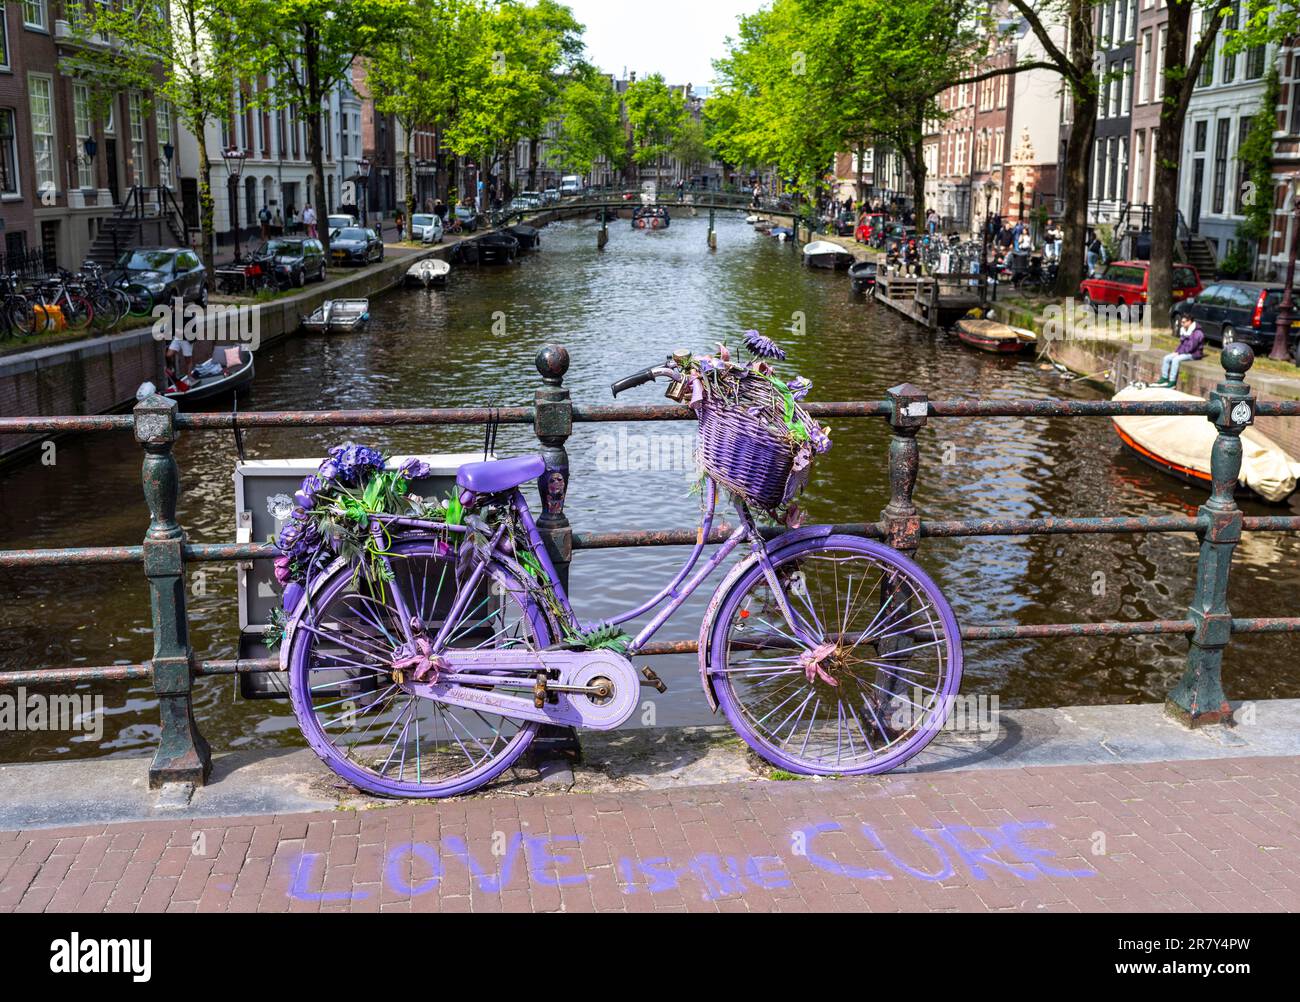 A purple bicycle on a canal bridge at Lijnbaansgracht Amsterdam, Netherlands. Stock Photo